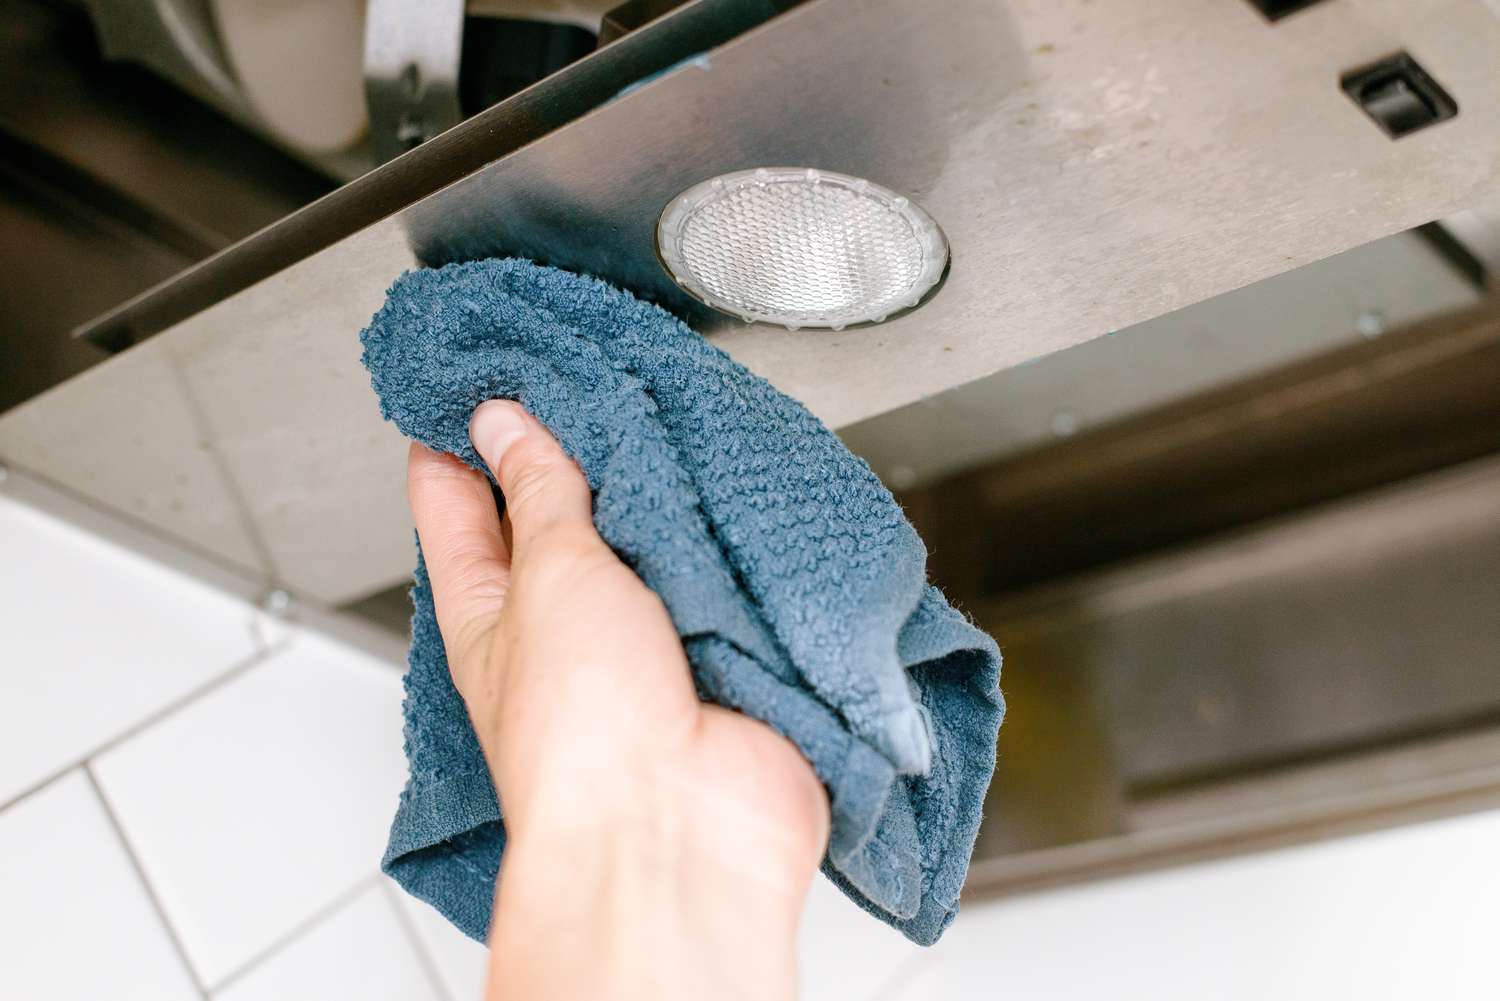 How To Clean An Exhaust Fan In The Kitchen